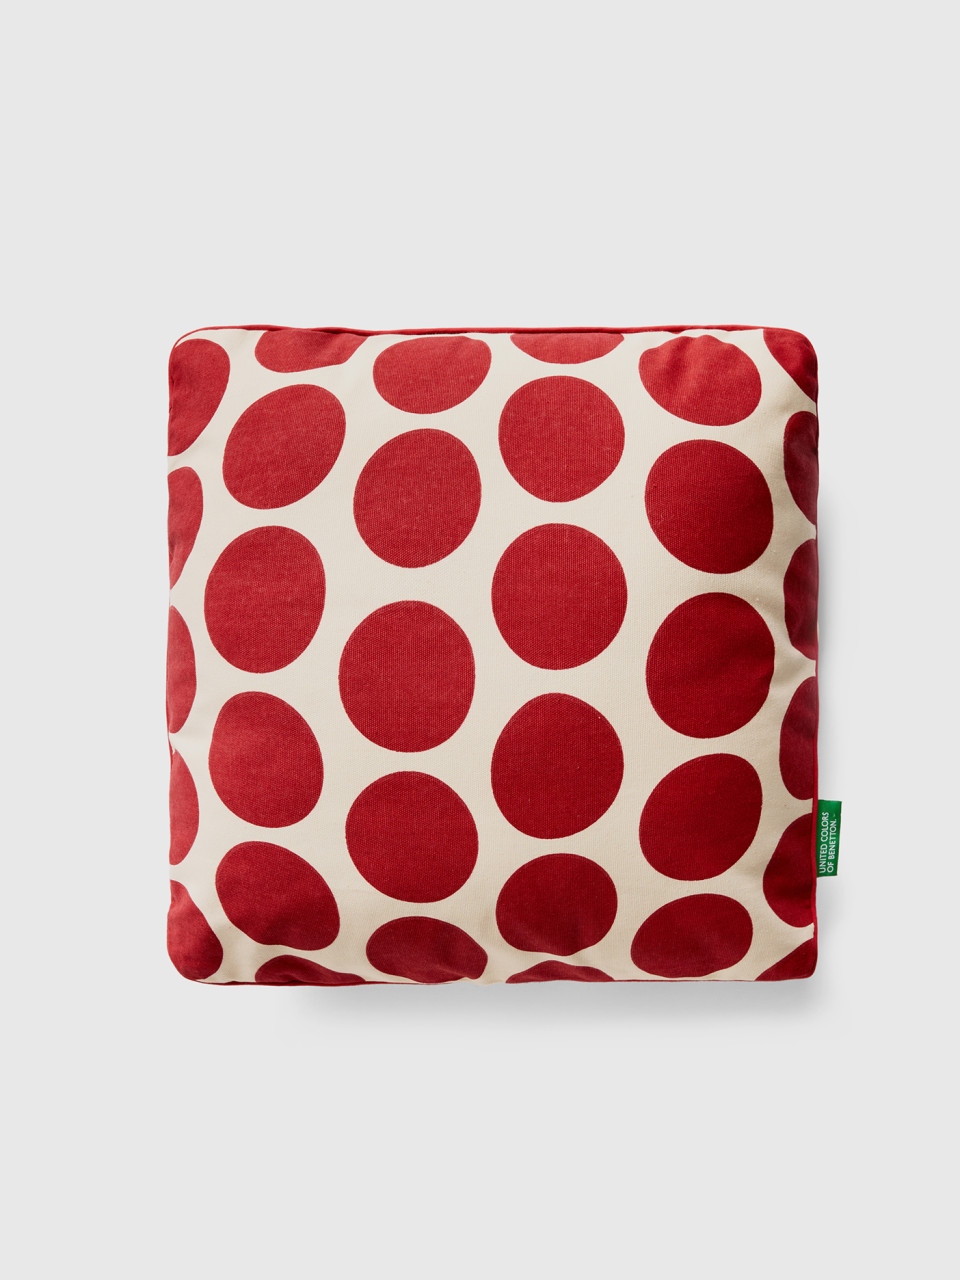 Benetton, Square Pillow With Red Polka Dots, White, Benetton Home